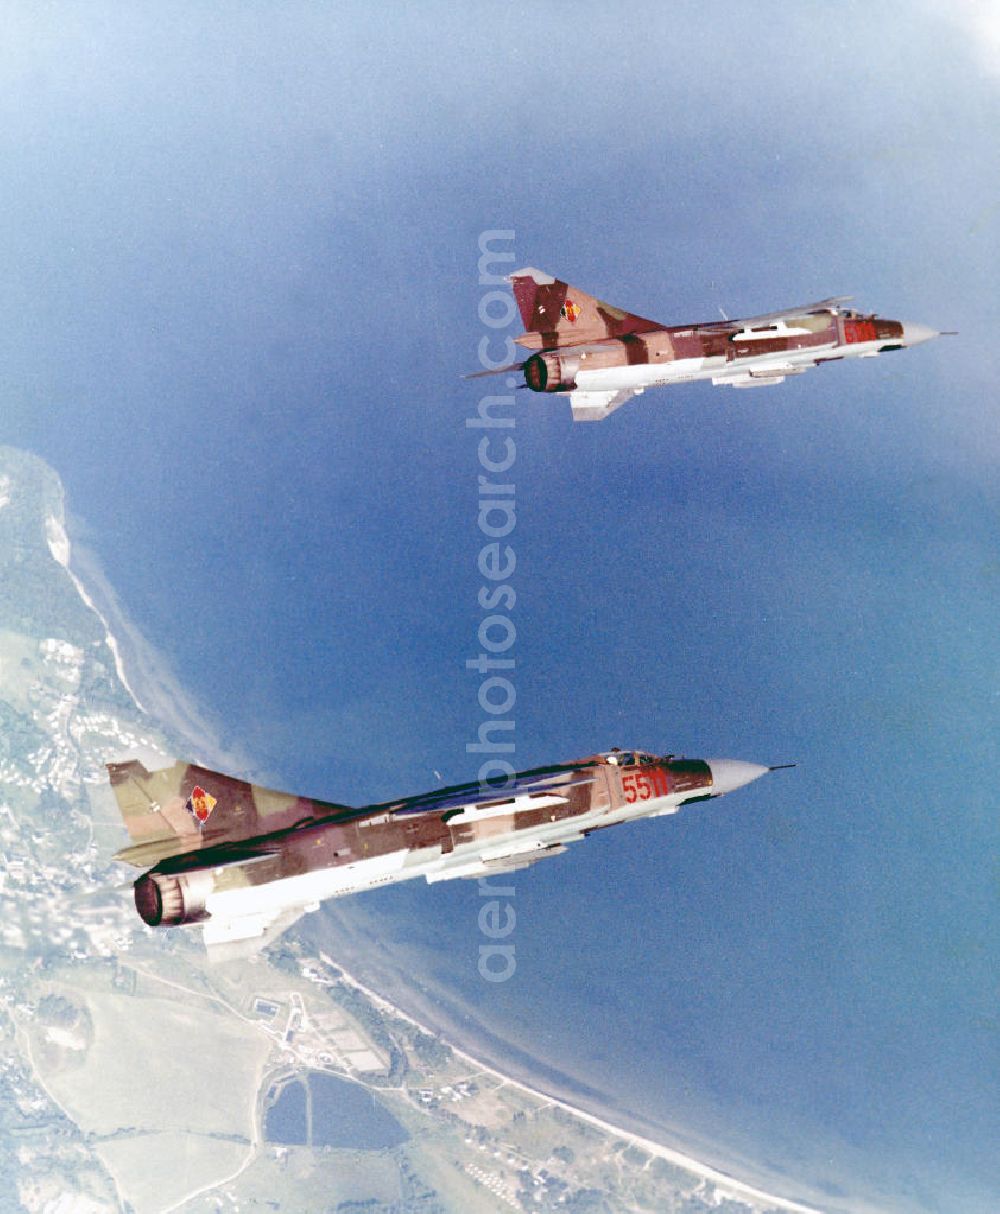 Aerial photograph Peenemünde - Formation flight of a pair of Mig 23 fighter aircraft from the GDR- Air Force